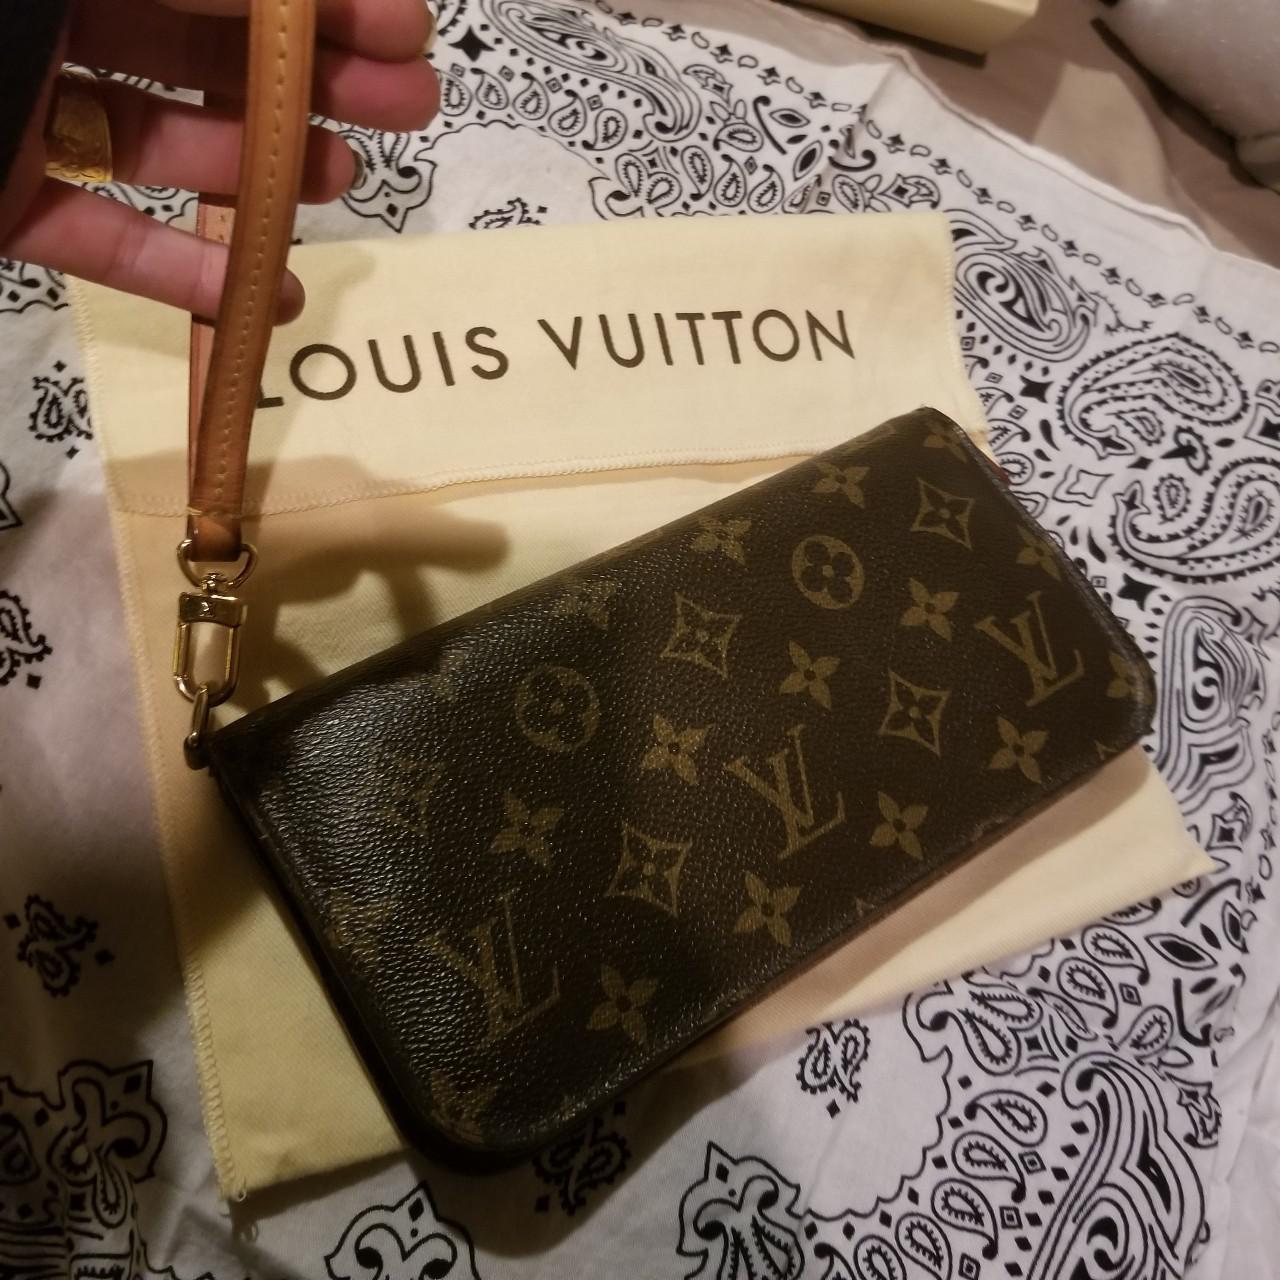 Louis Vuitton slim wallet/purse. This came with a - Depop